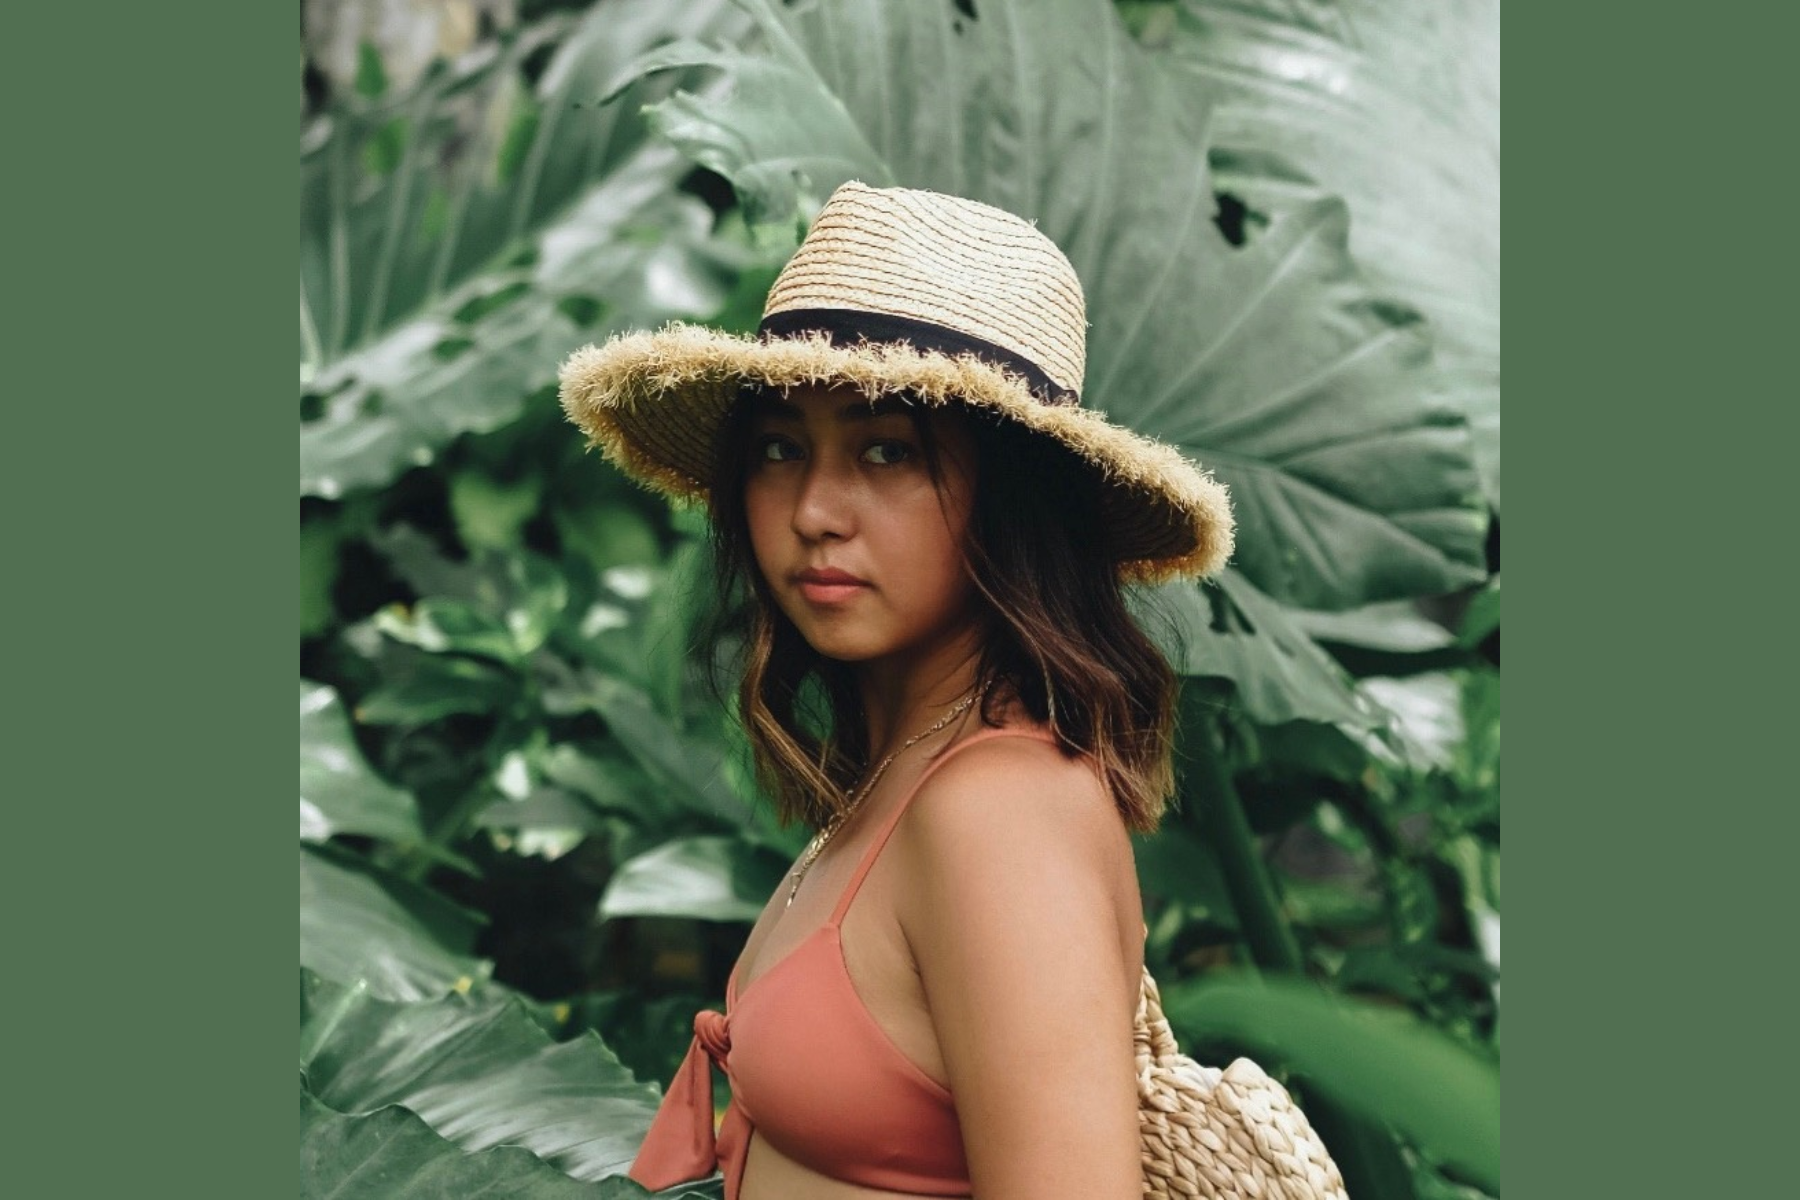 Andie Javelosa in a simple hat in a leafy setting